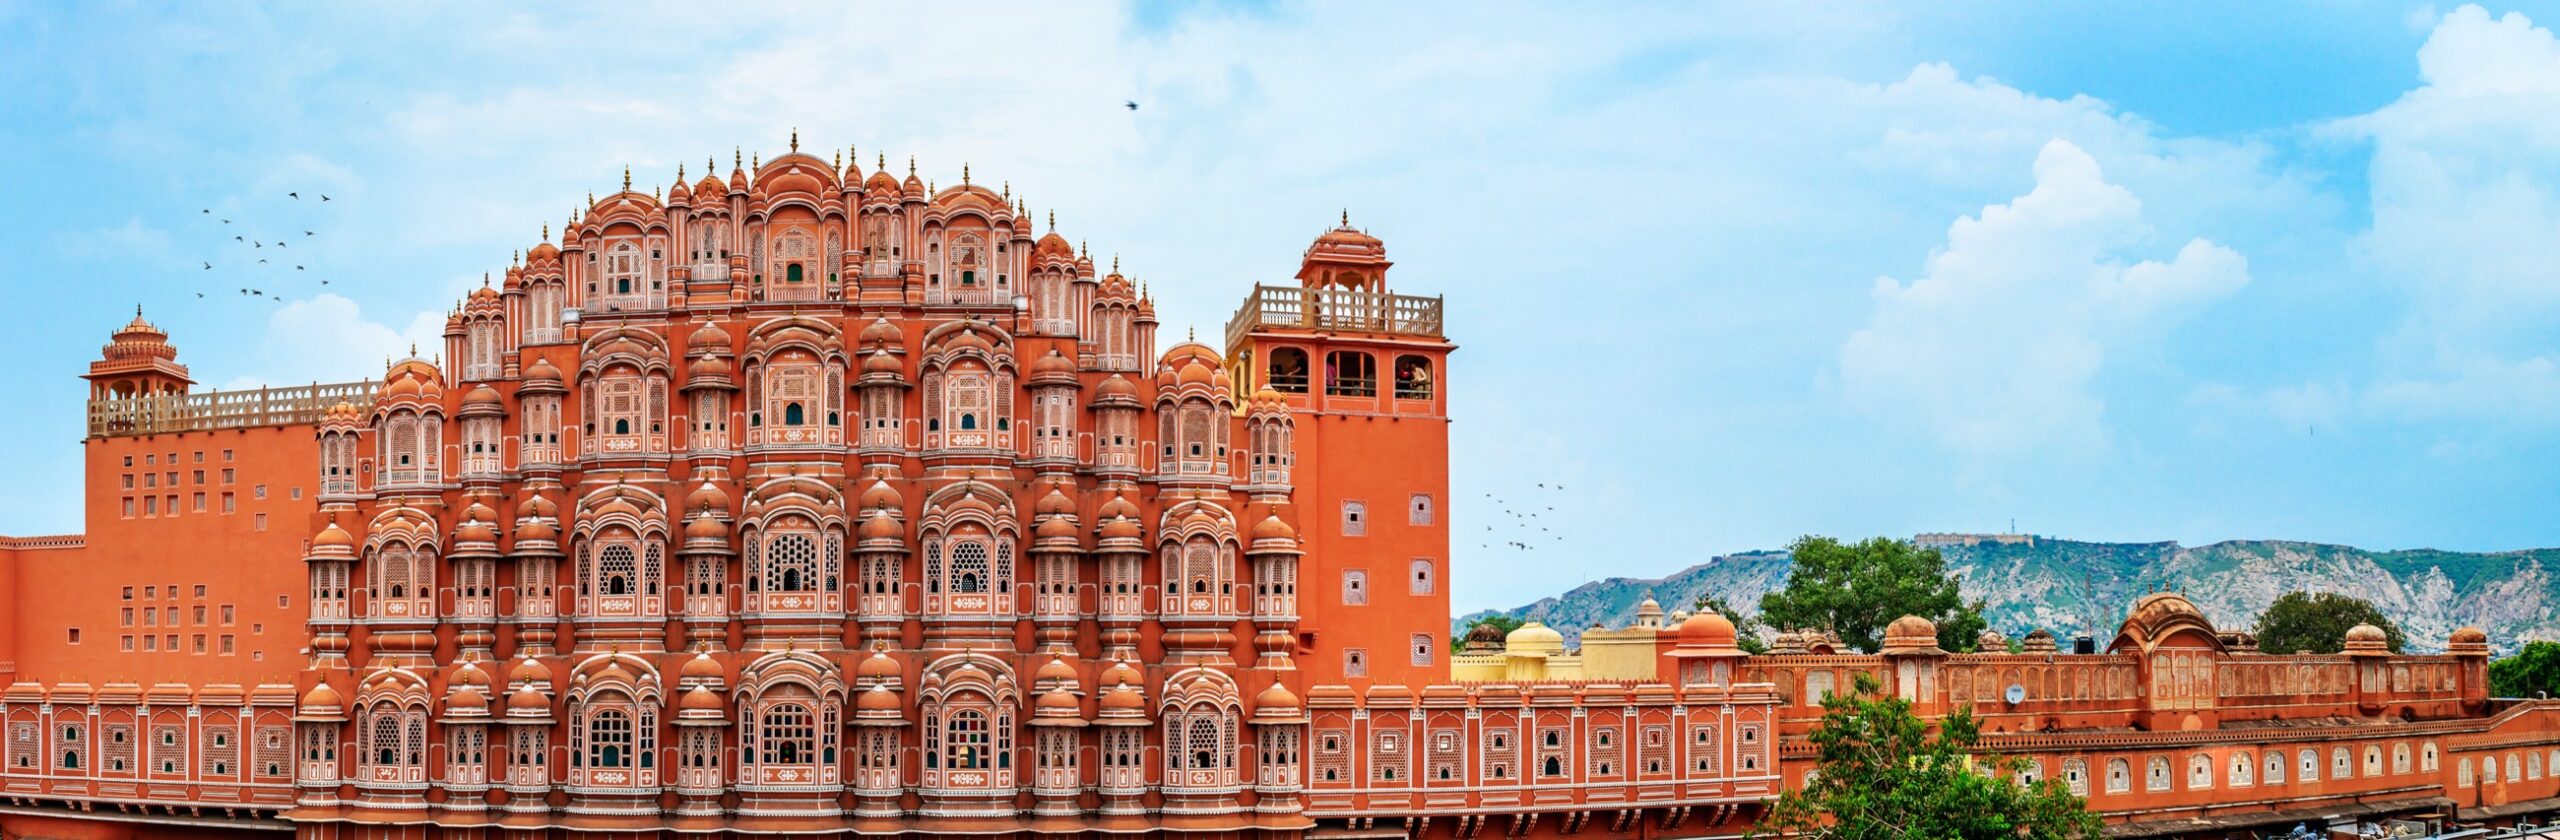 Jaipur-The-City-That's-Pretty-in-Pink–The-Best-Things-to-Do